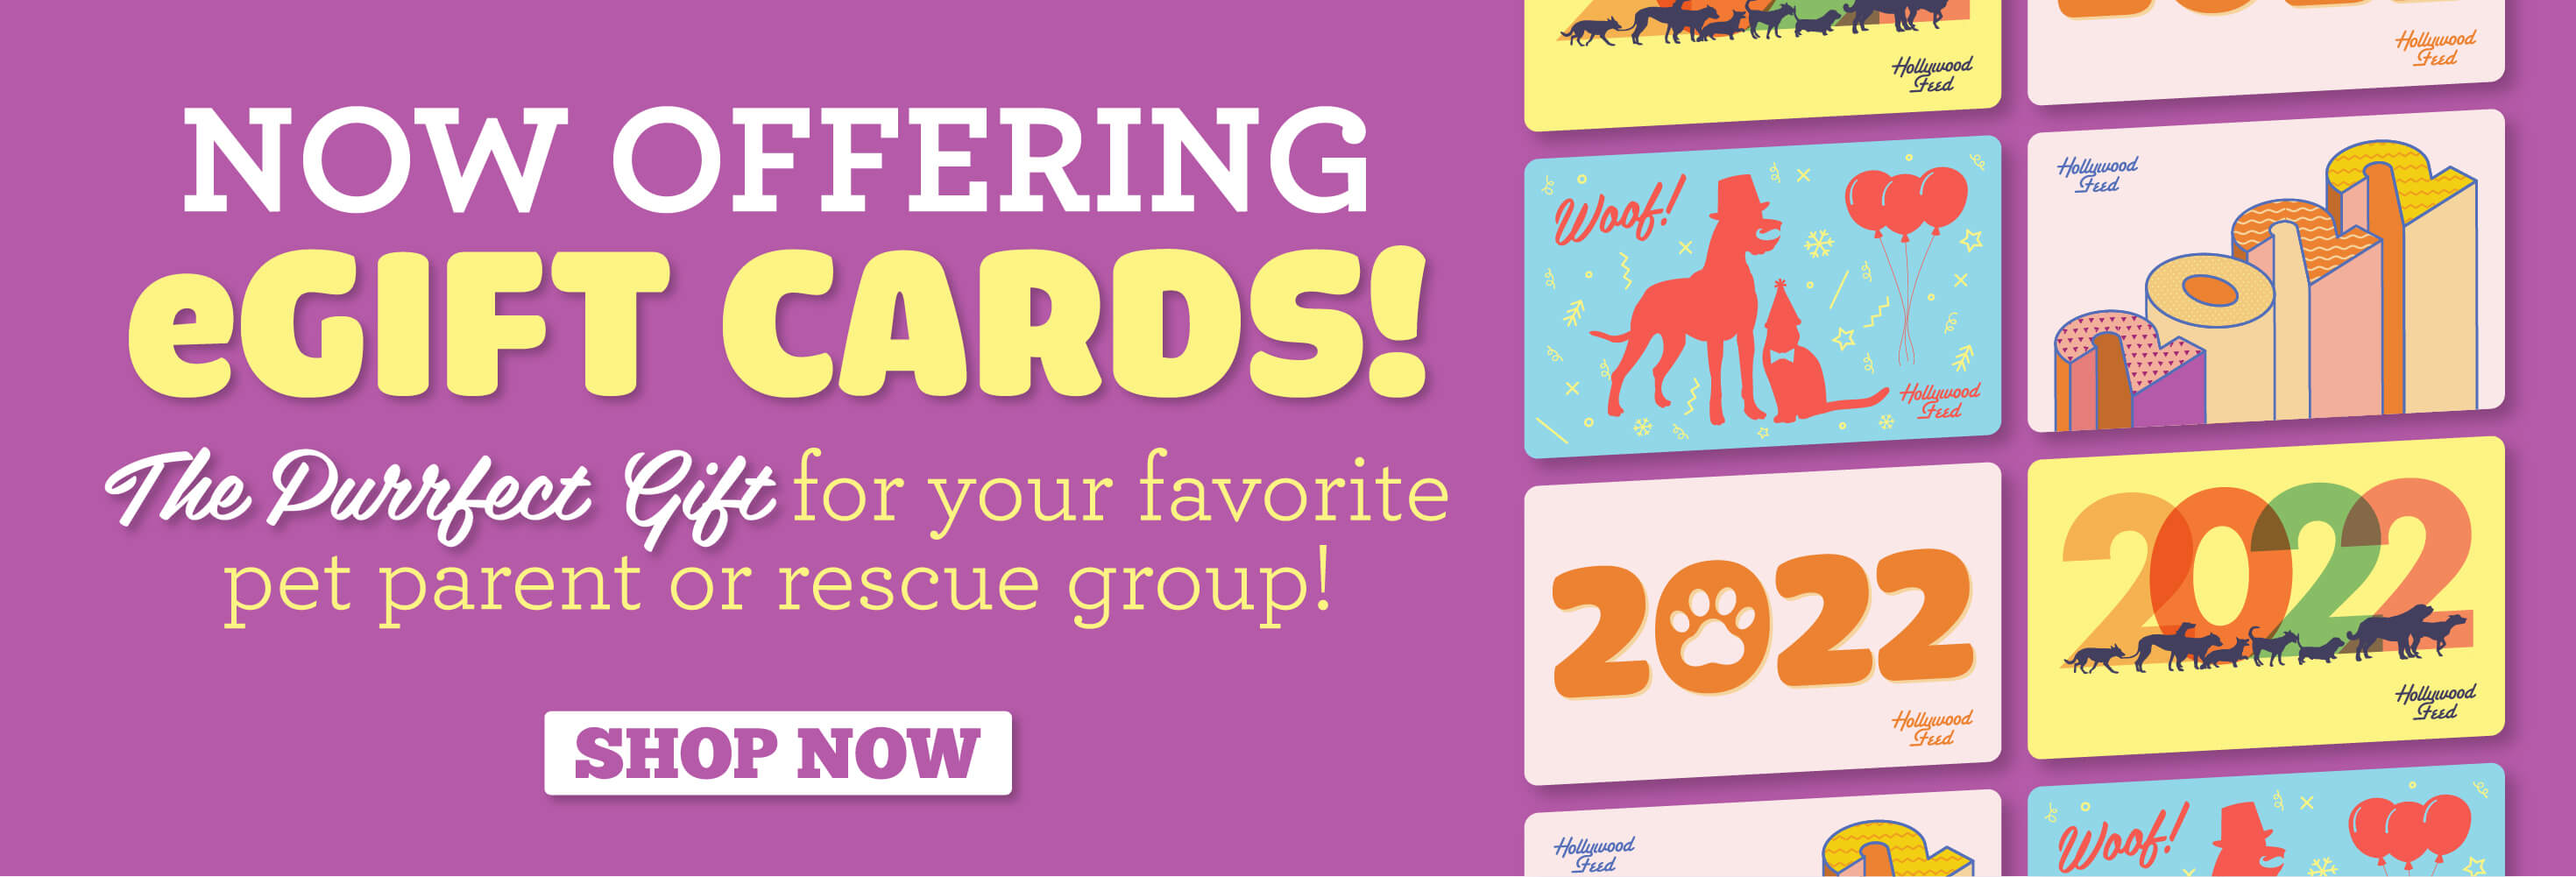 Now Offering eGift Cards. The purrfect gift for your favourite pet parent or rescue group.